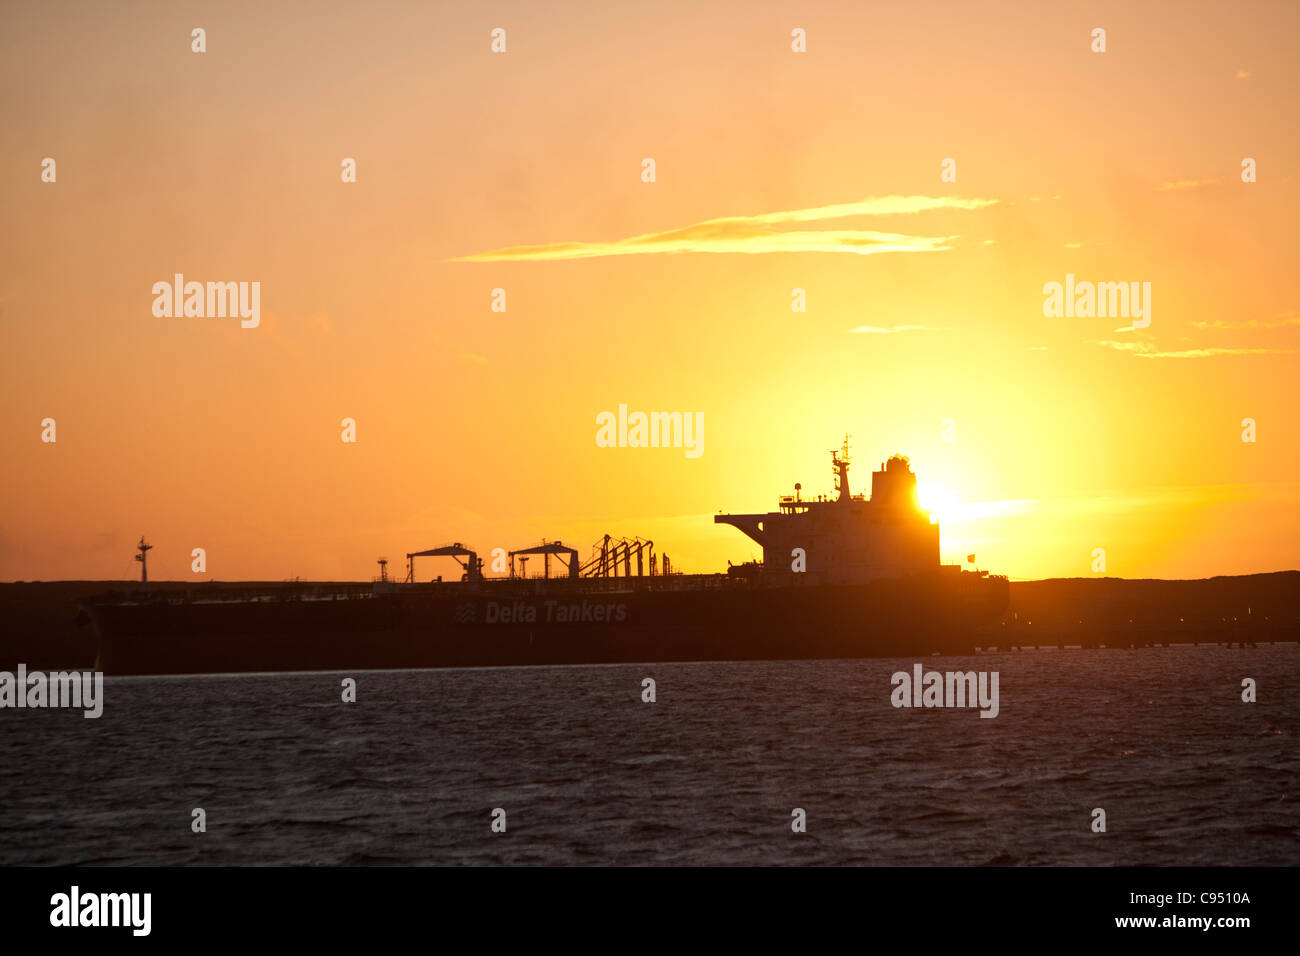 A Greek oil tanker docked at the Flotta oil terminal on the Idsland of flotta in the Orkney's Scotland, UK. Stock Photo